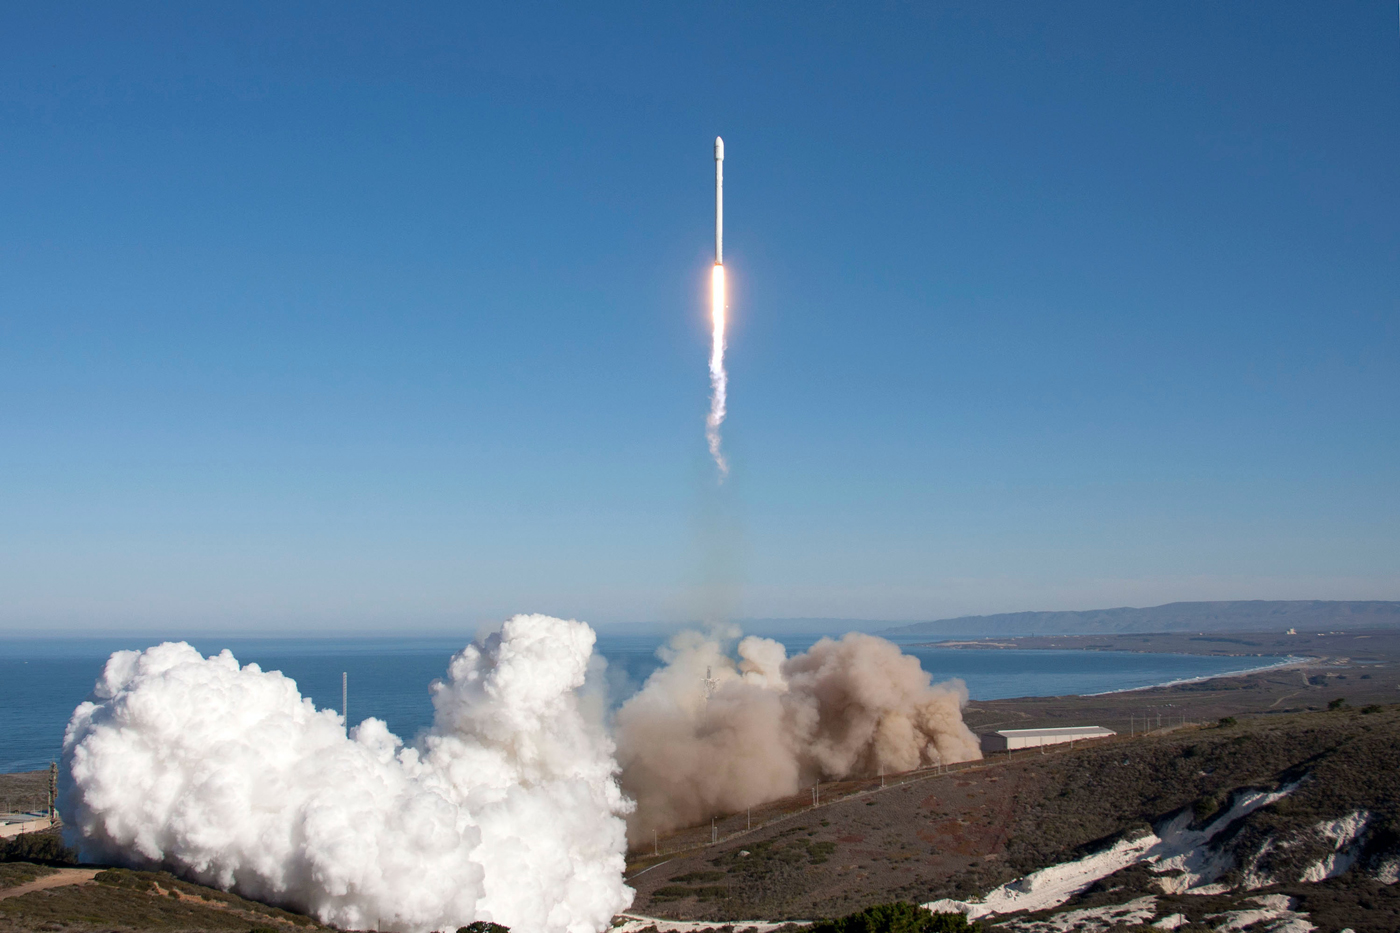 A space rocket launches from a coastal launch pad.